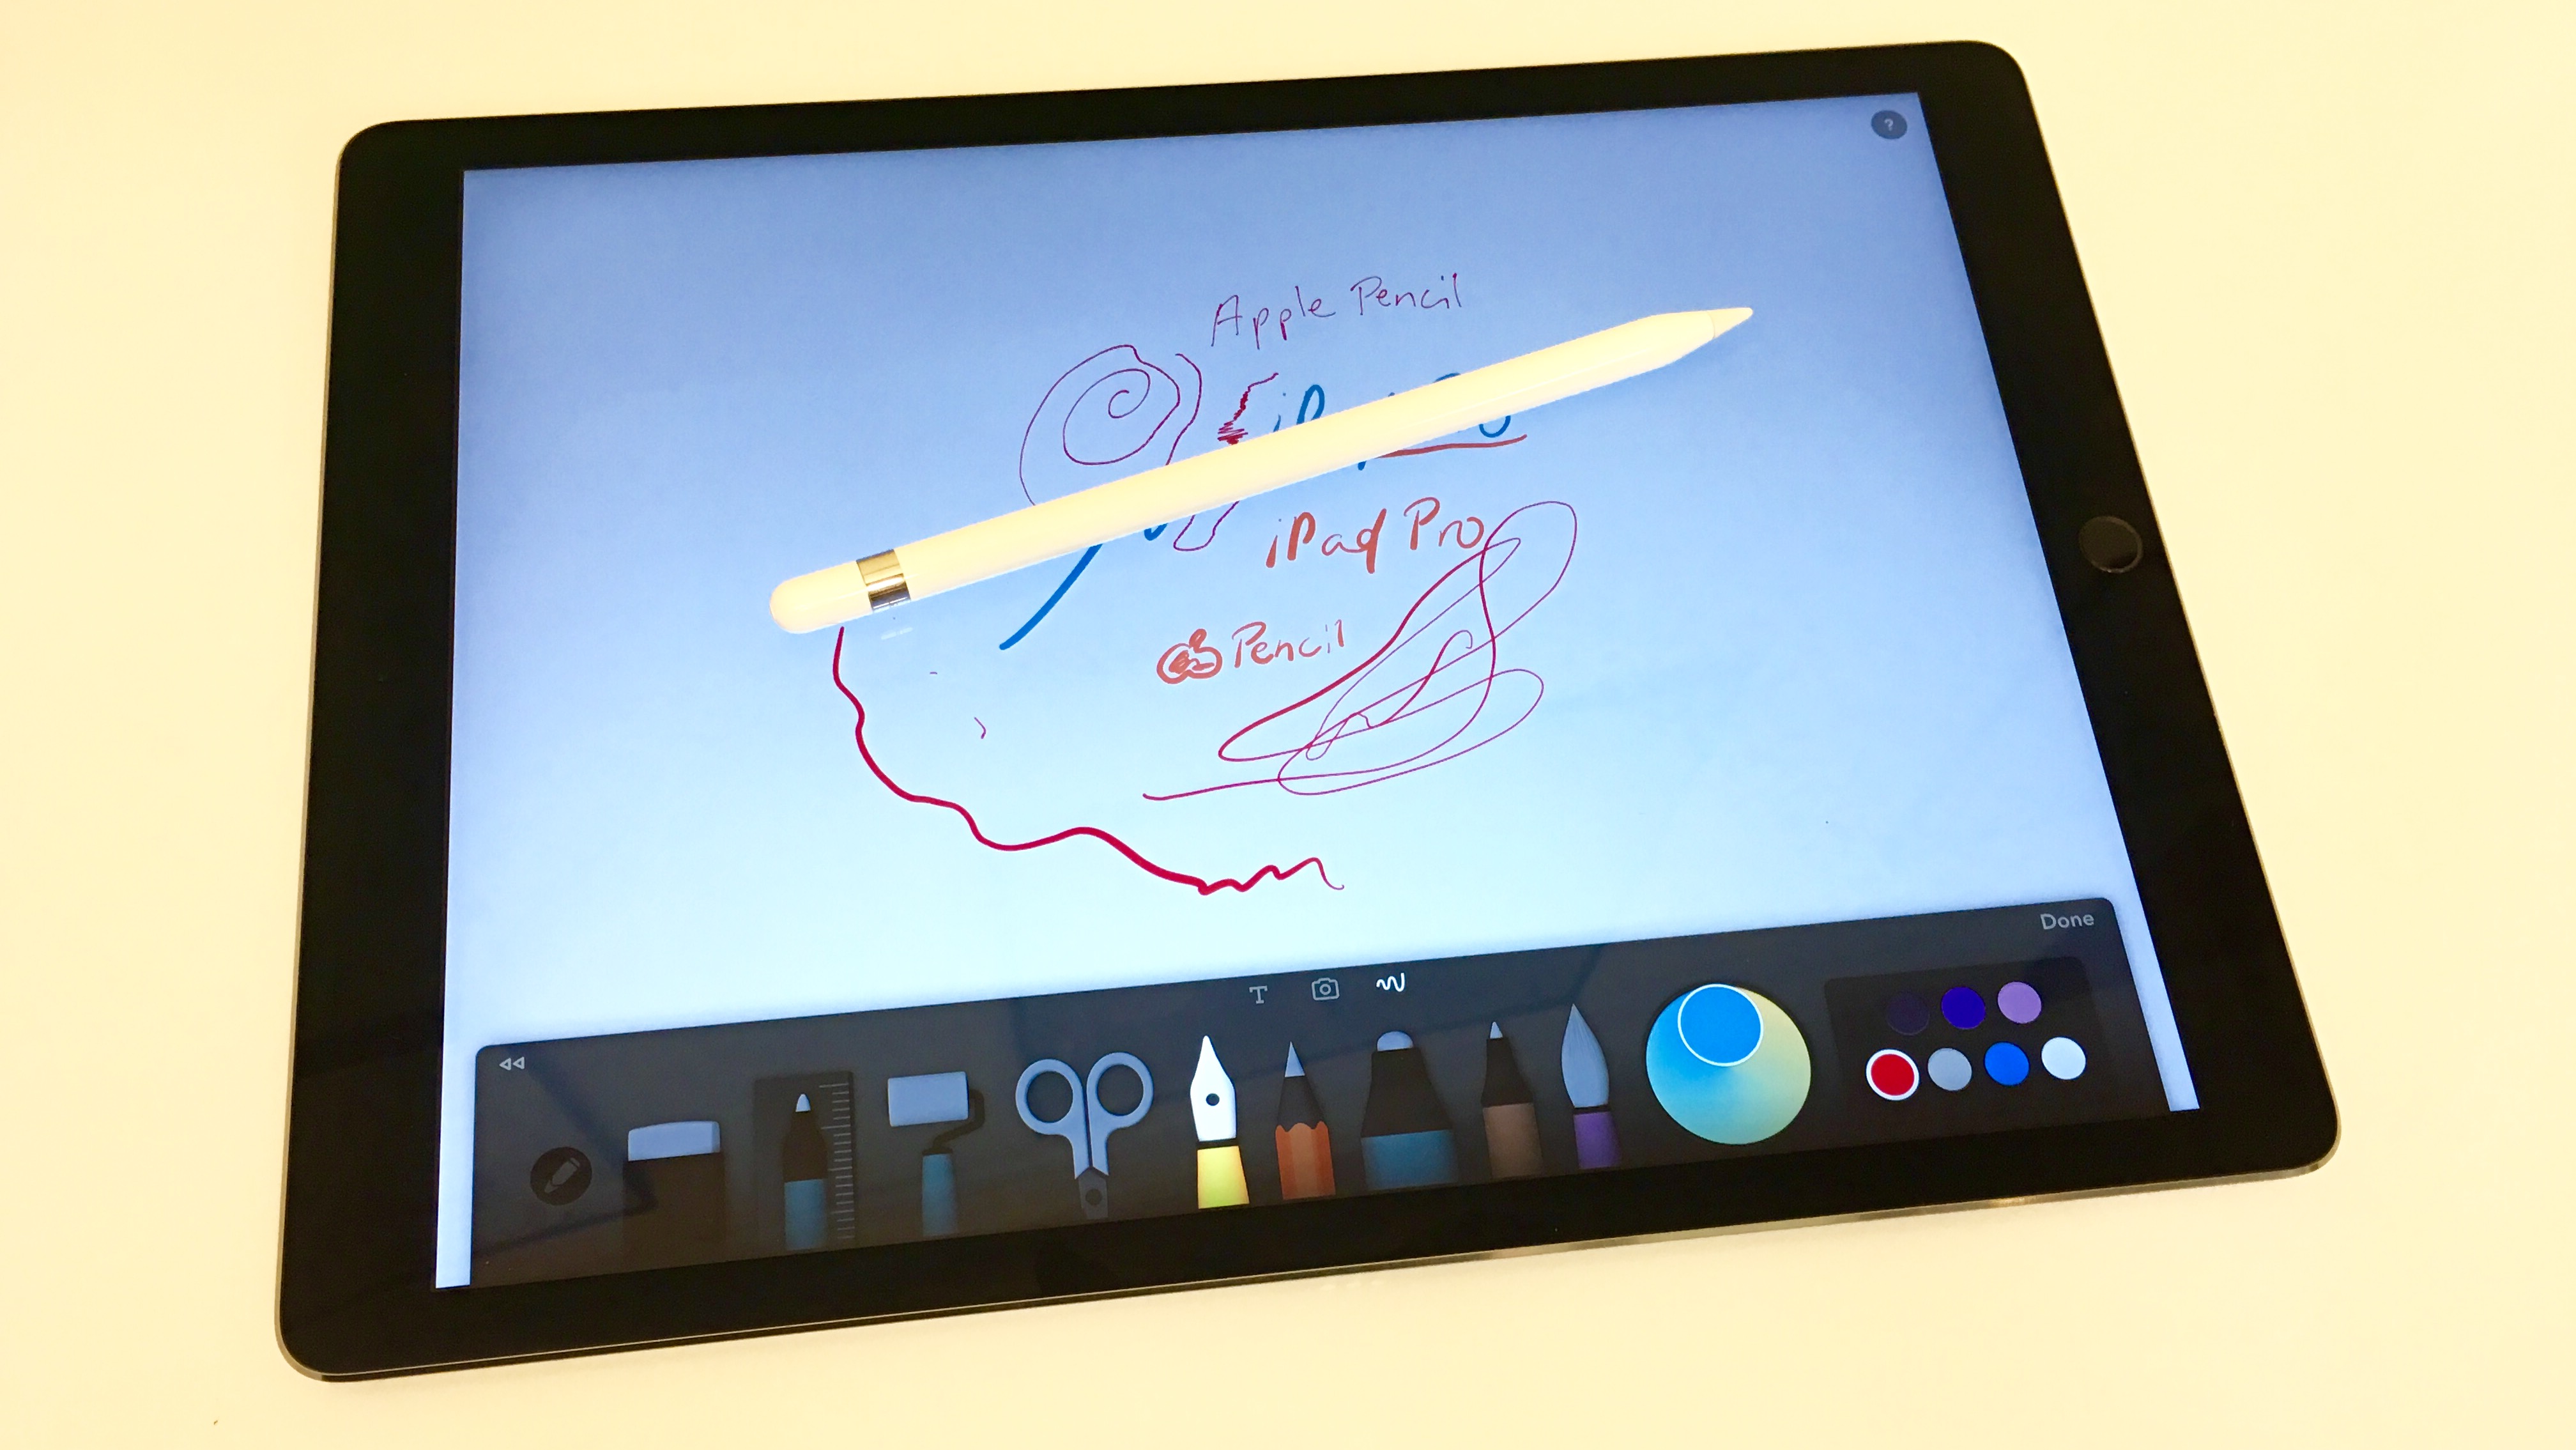 Apple Pencil hands-on 4